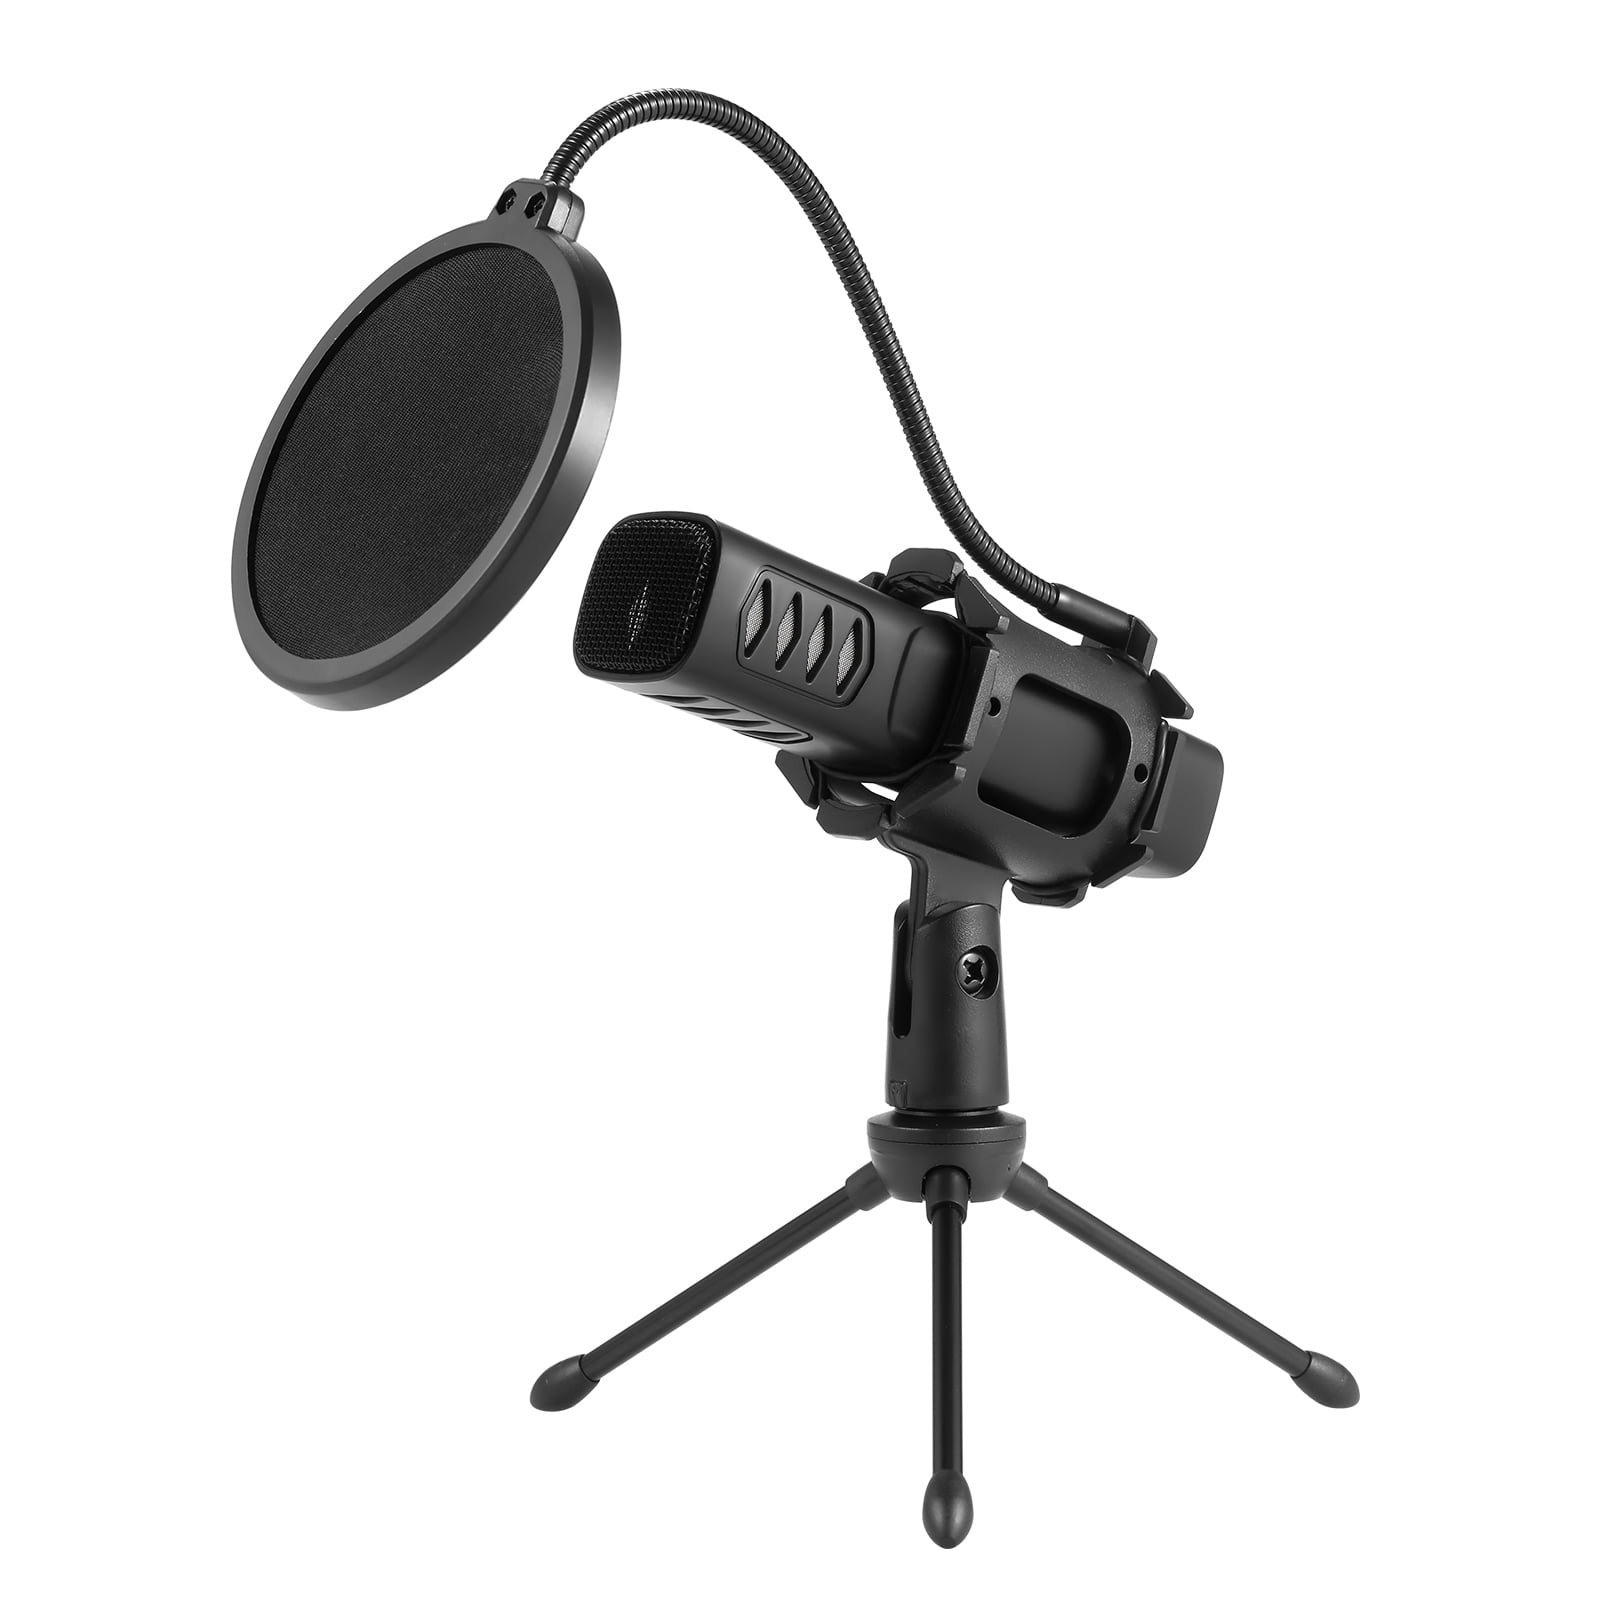 Walmeck USB Microphone Cardioid Condenser Mic with Tripod Stand Pop Filter Shock Mount for Gaming Podcasting Compatible with PC Laptop Smartphone - Walmart.com